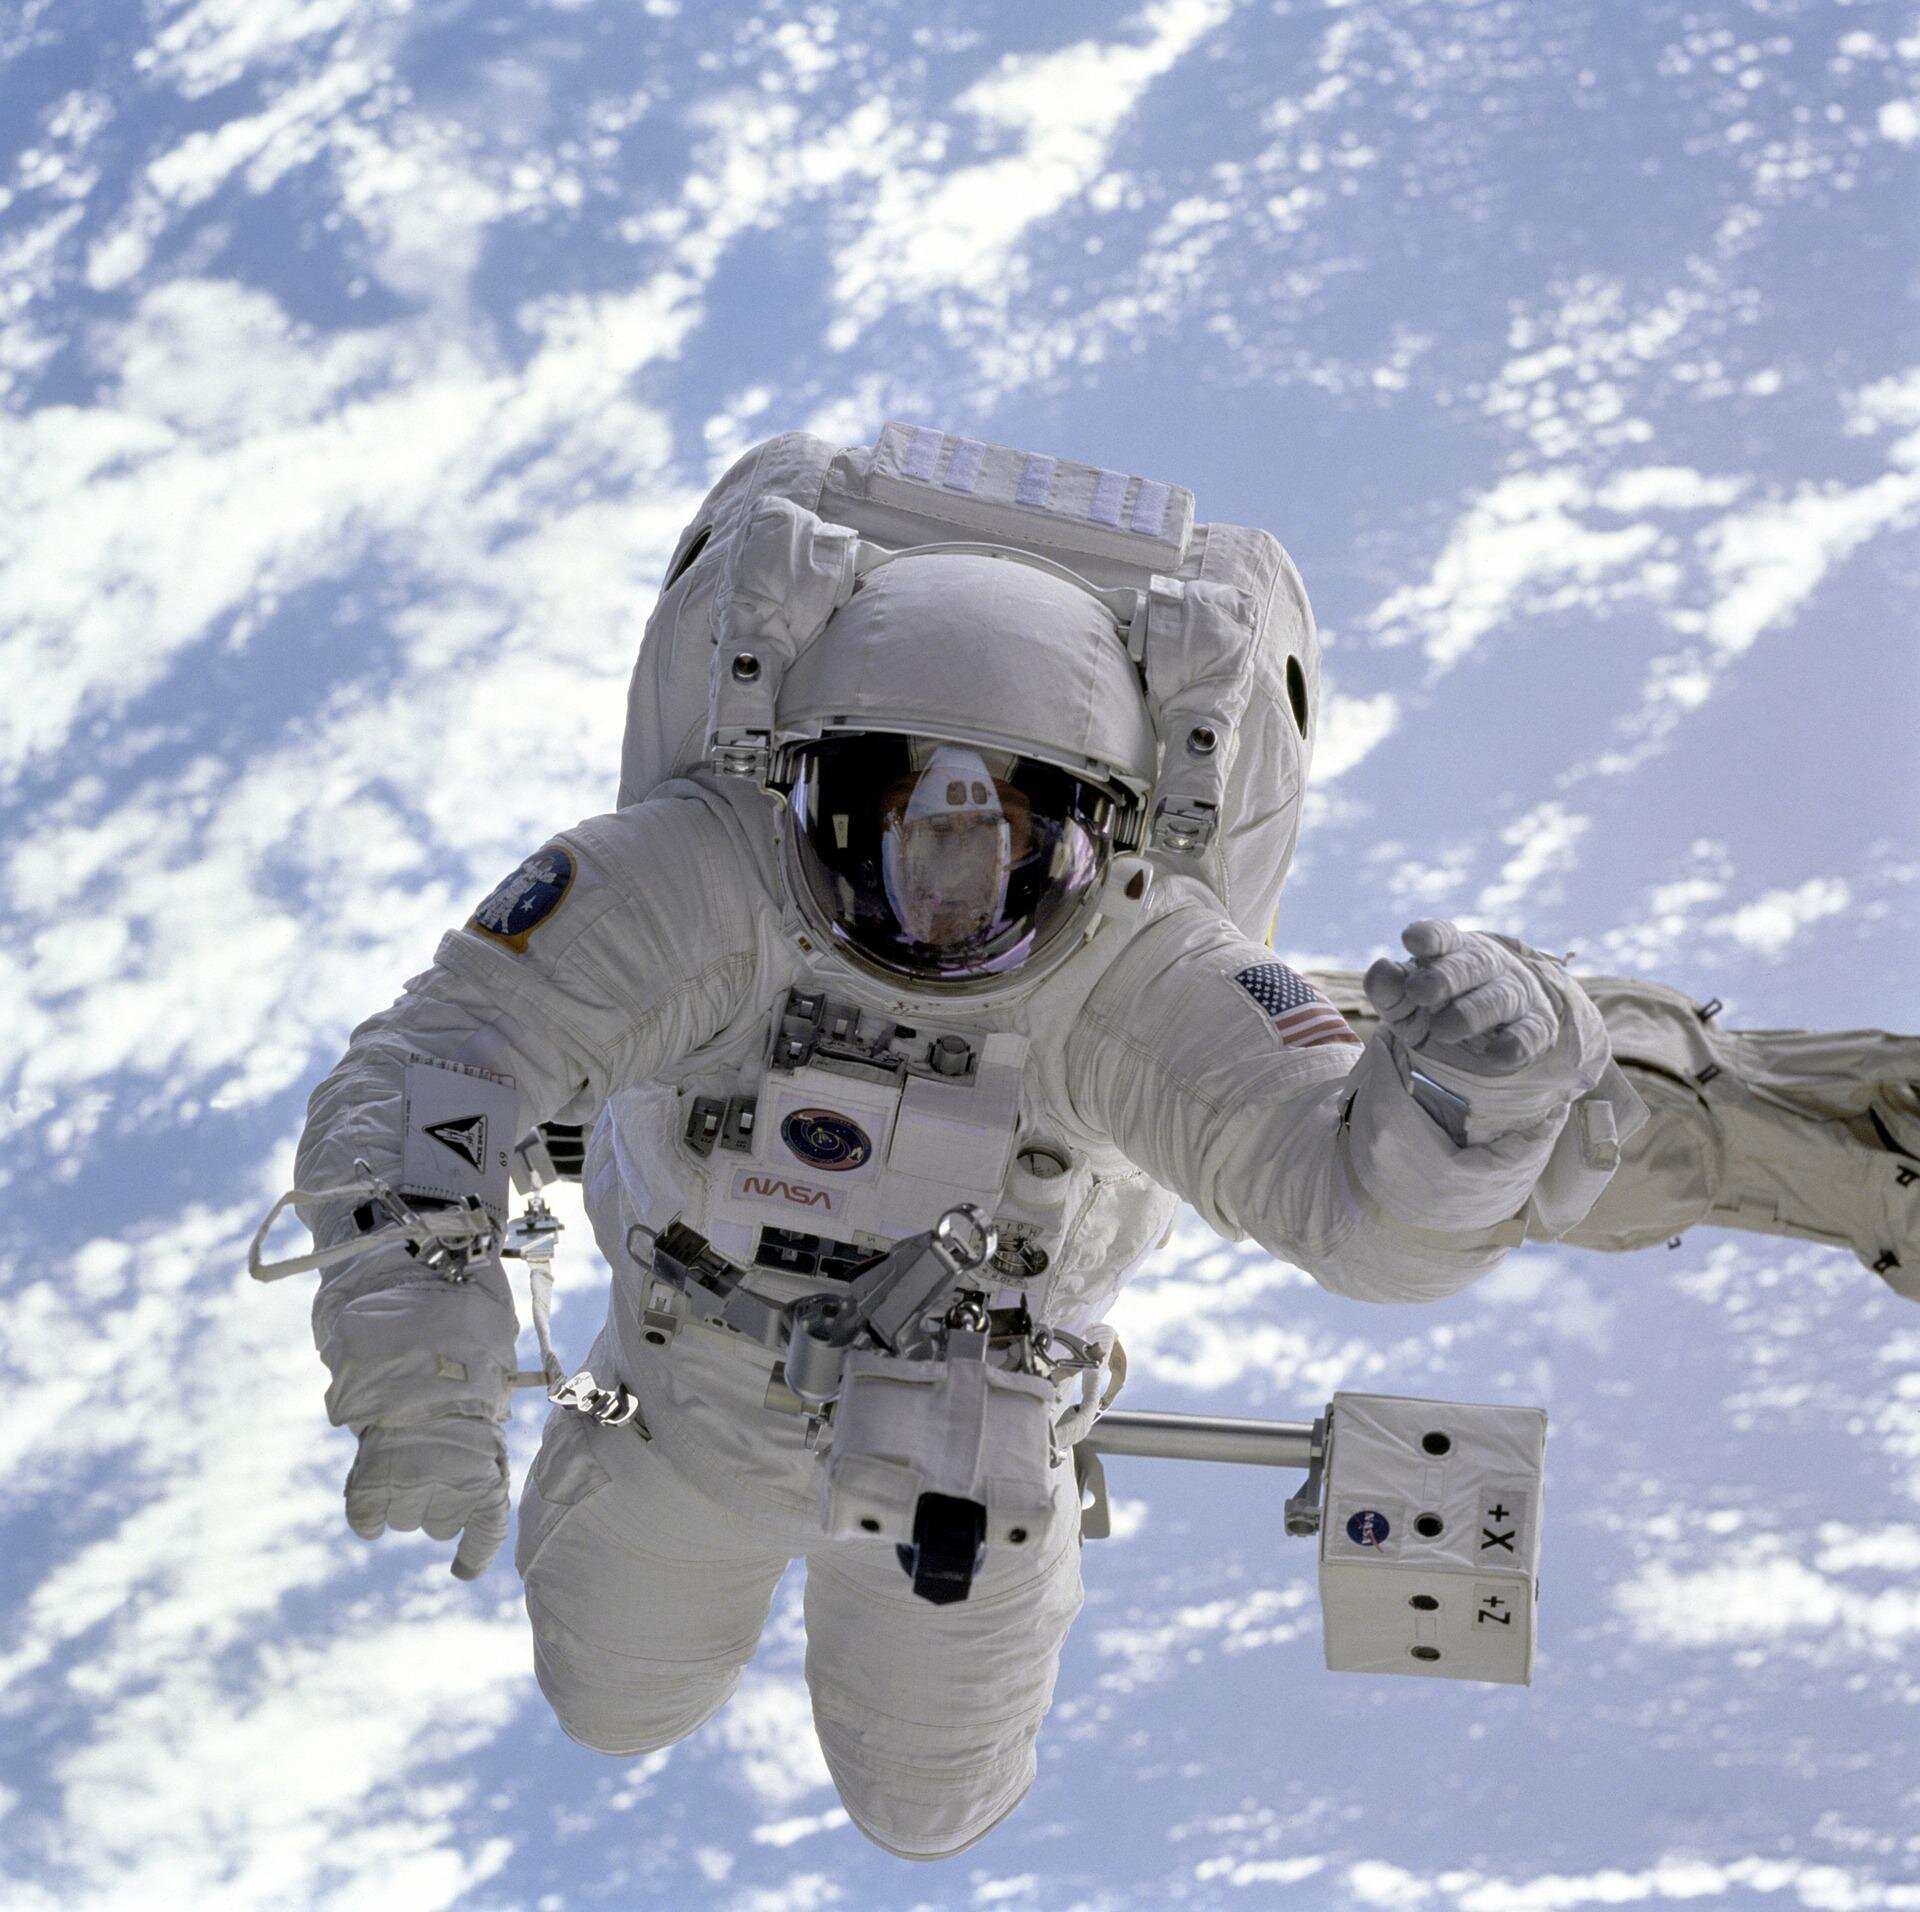 NASA awards two contracts for next generation spacesuits